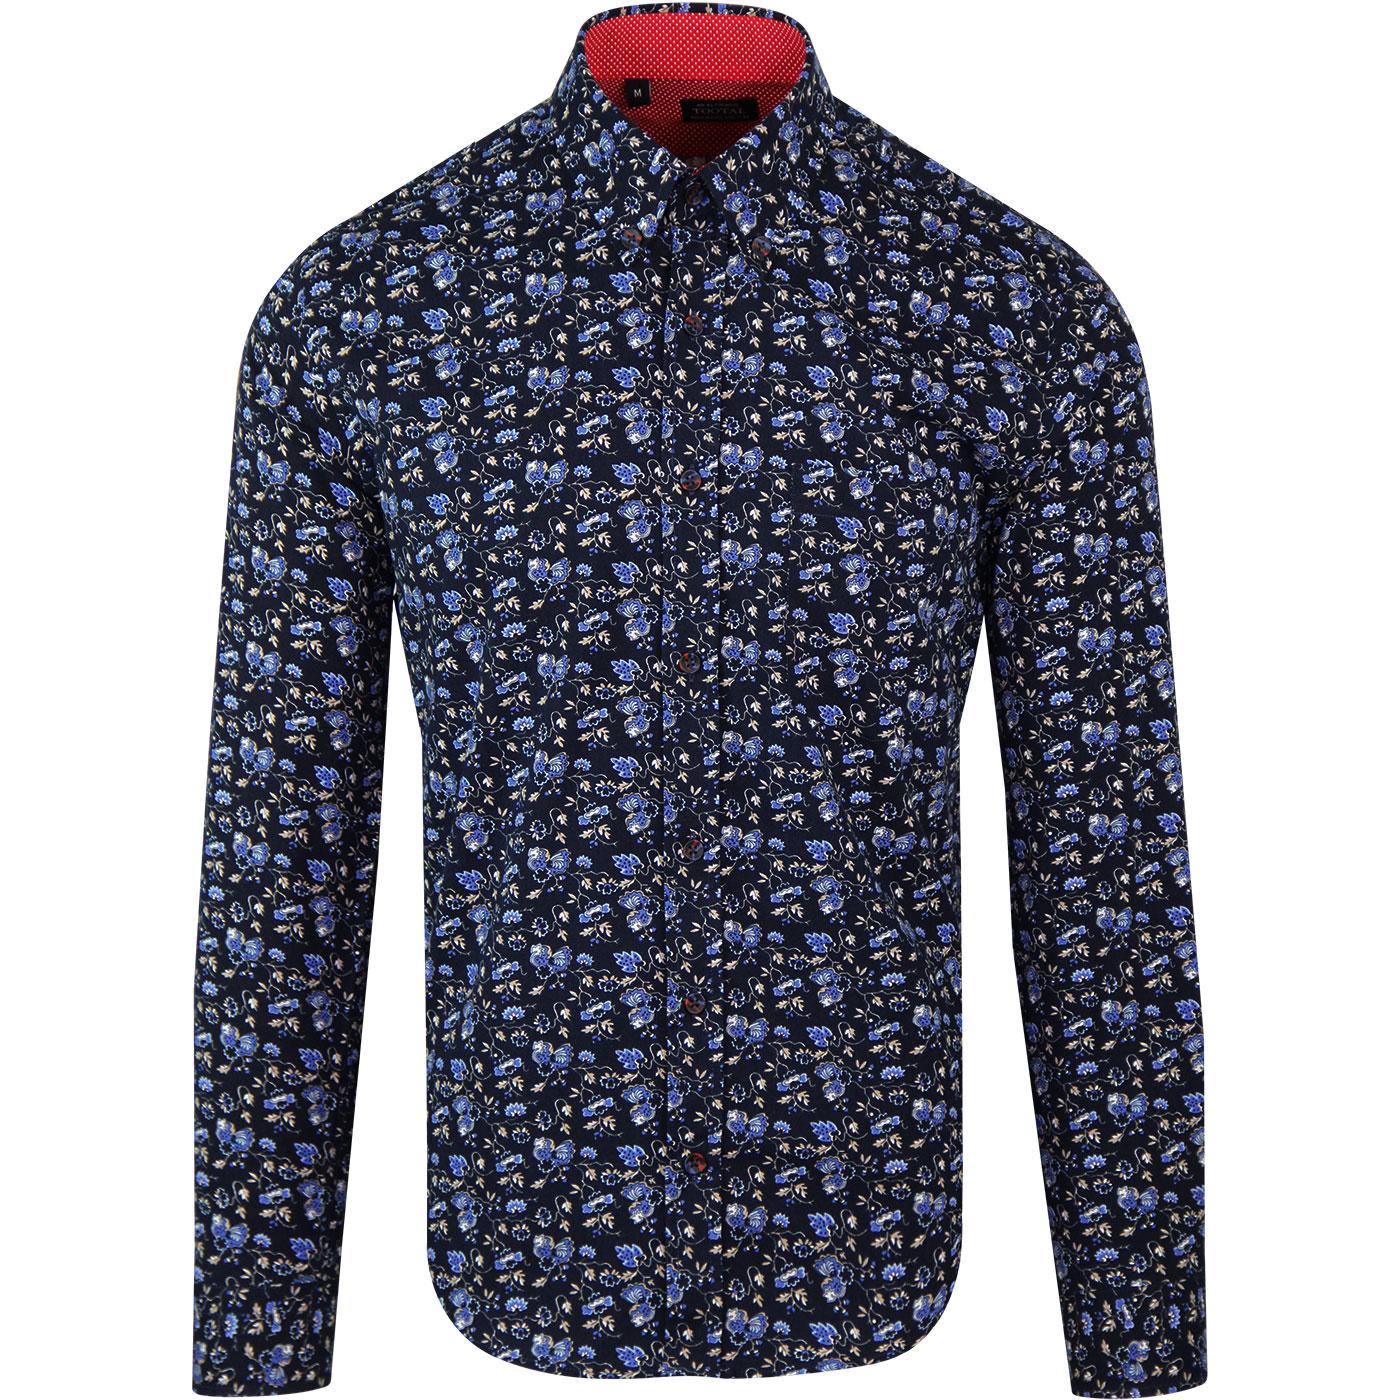 Ground TOOTAL Floral Print 1960s Mod Shirt Navy